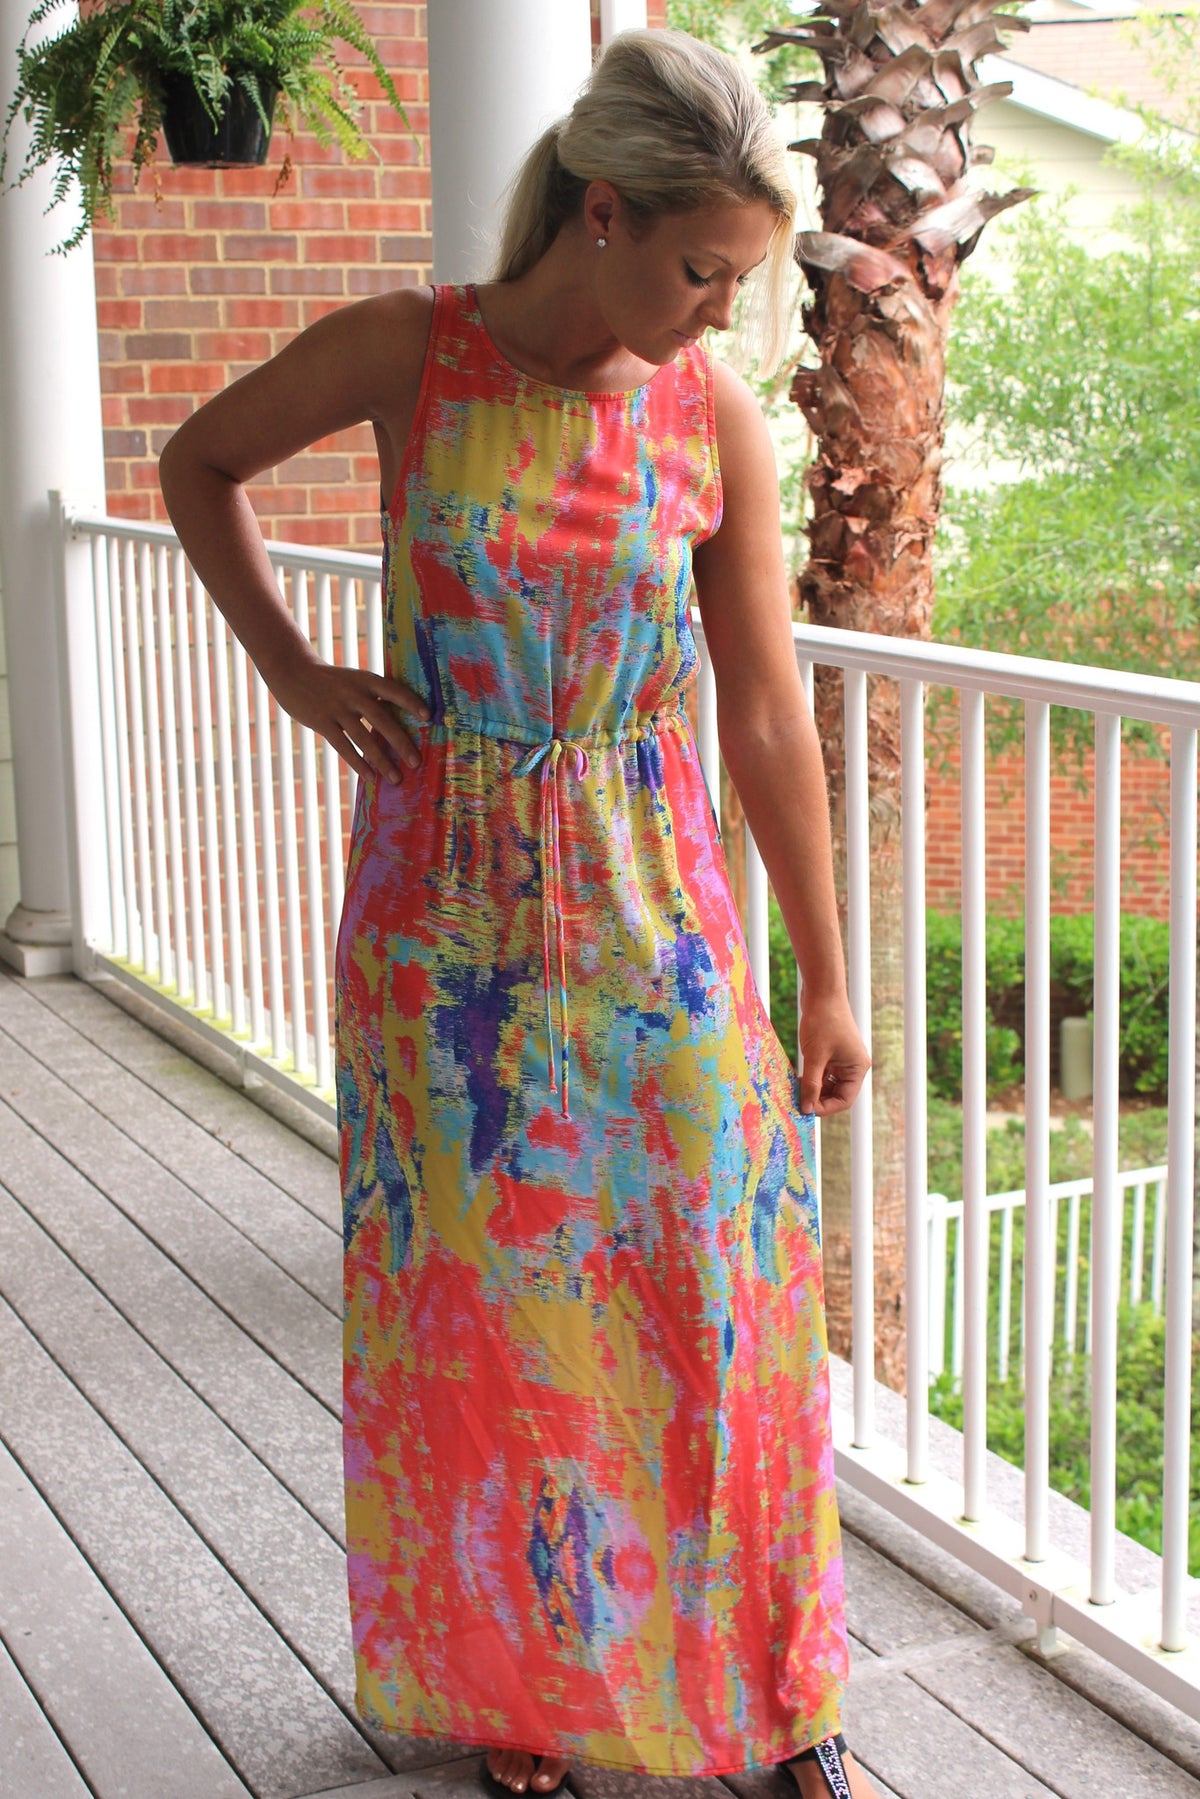 Glam: Avery Maxi Dress, Coral